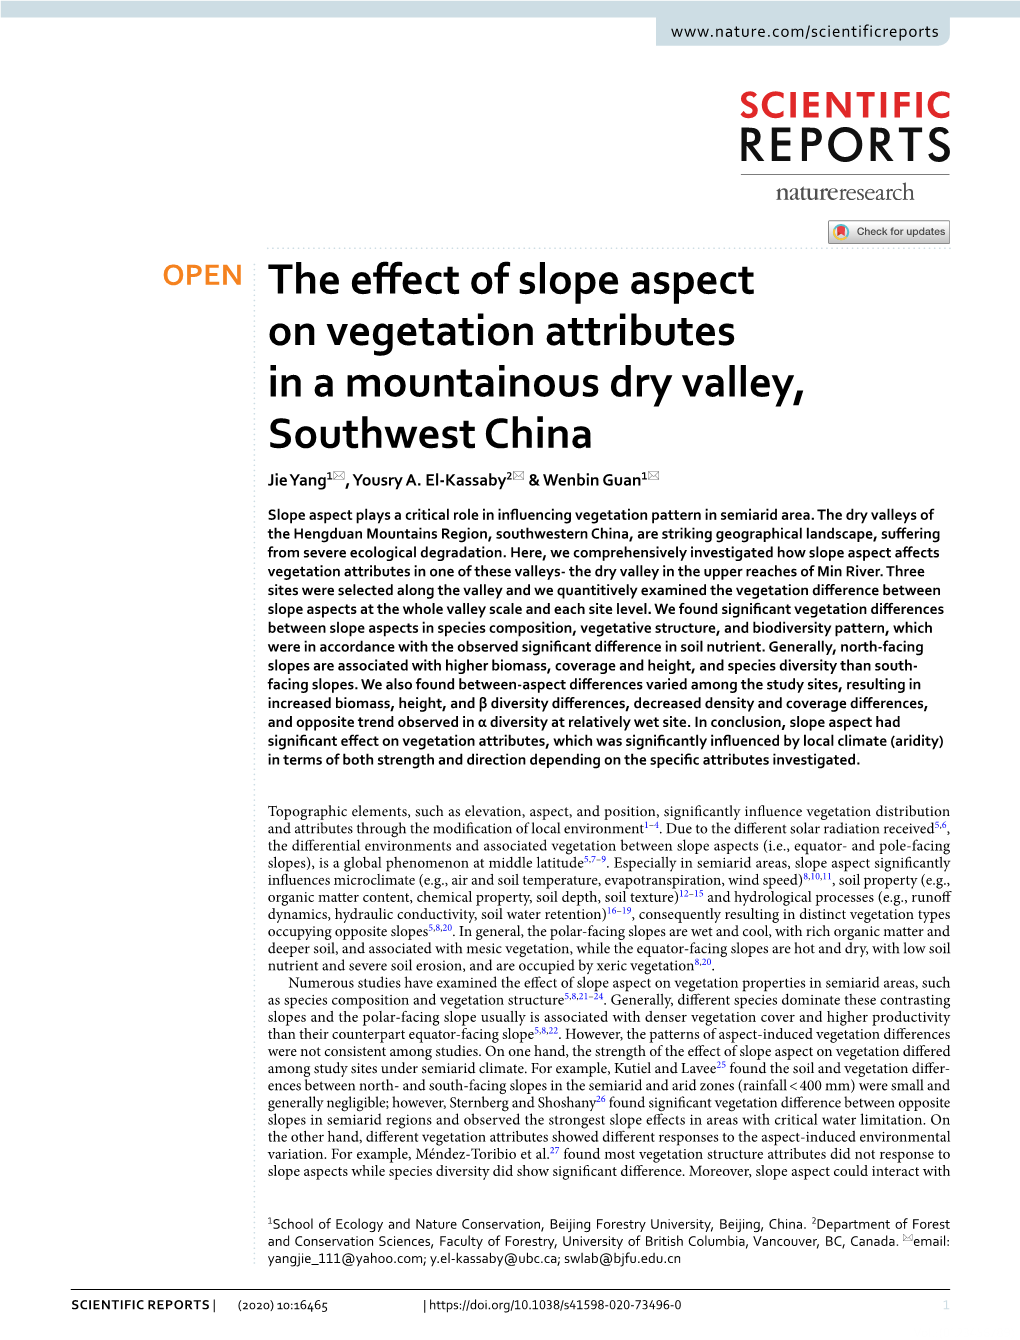 The Effect of Slope Aspect on Vegetation Attributes in A